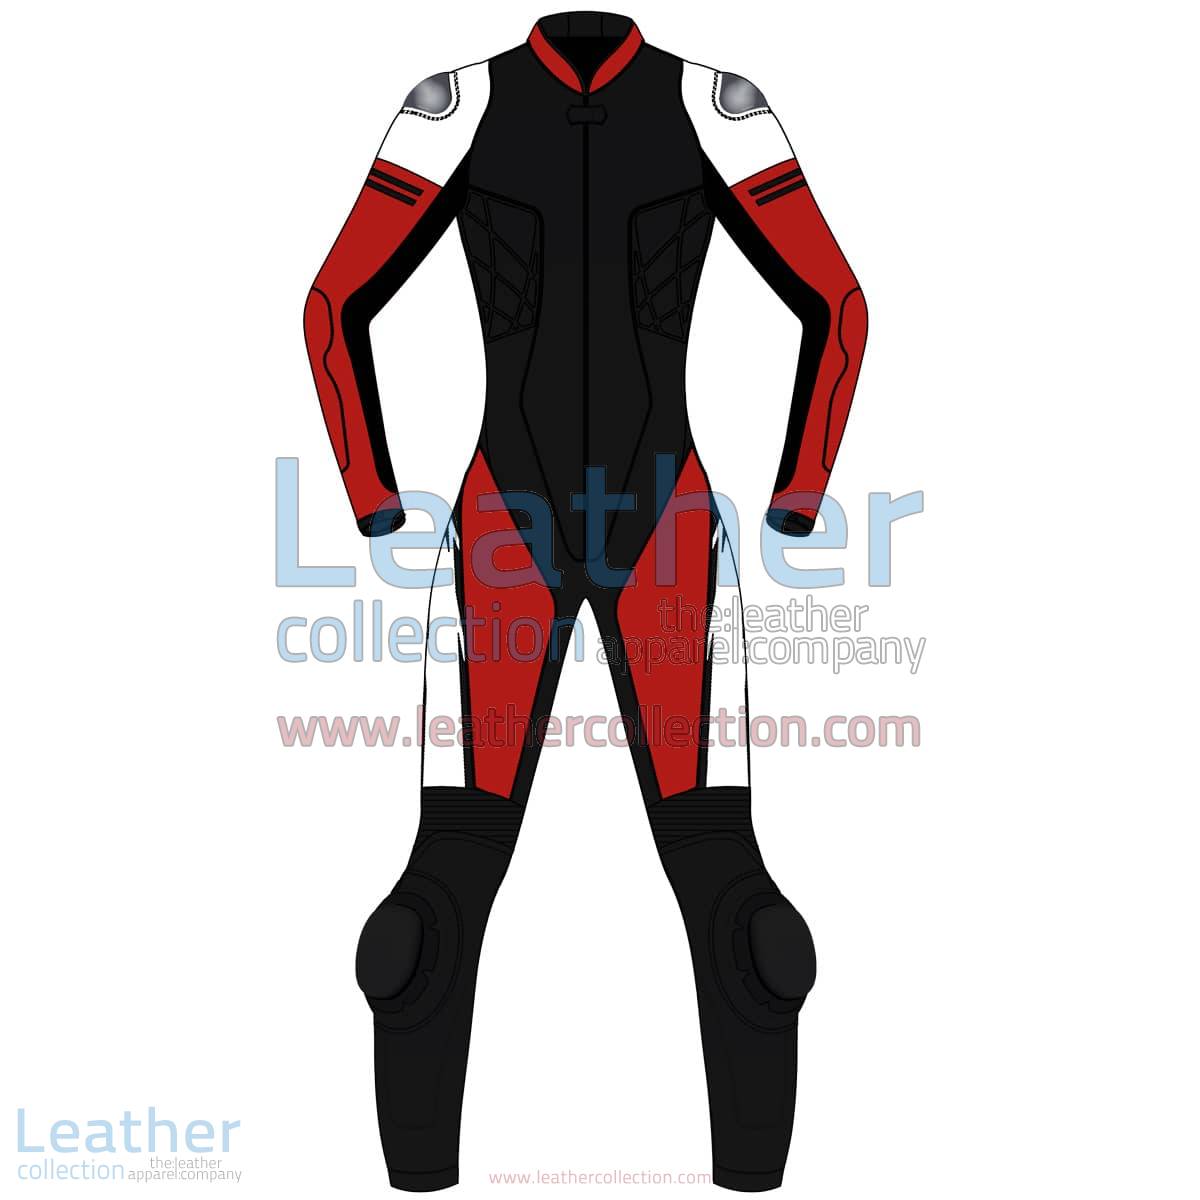 Tri Color One-Piece Motorbike Leather Suit For Women | motorcycle Suit Women,Tri Color One-Piece motorcycle Leather Suit For Women